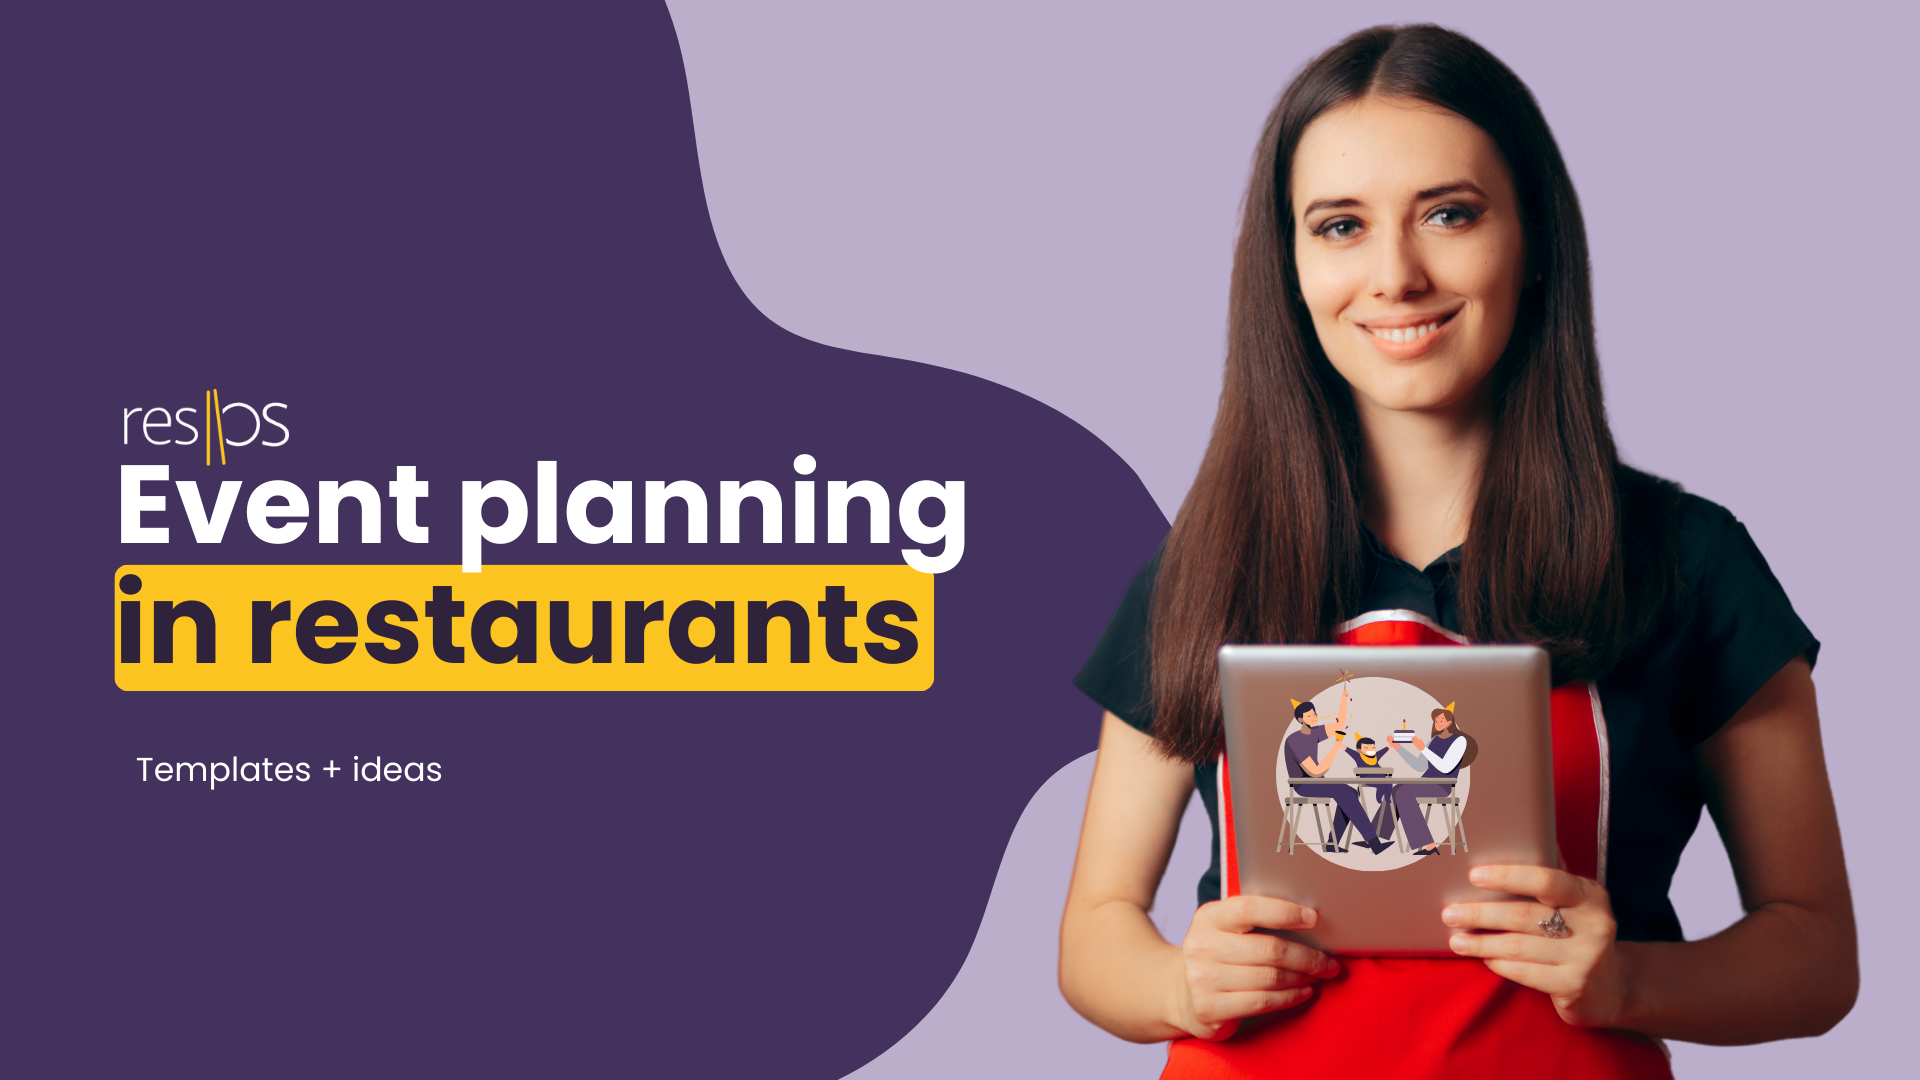 Event planning in restaurants + ideas and template